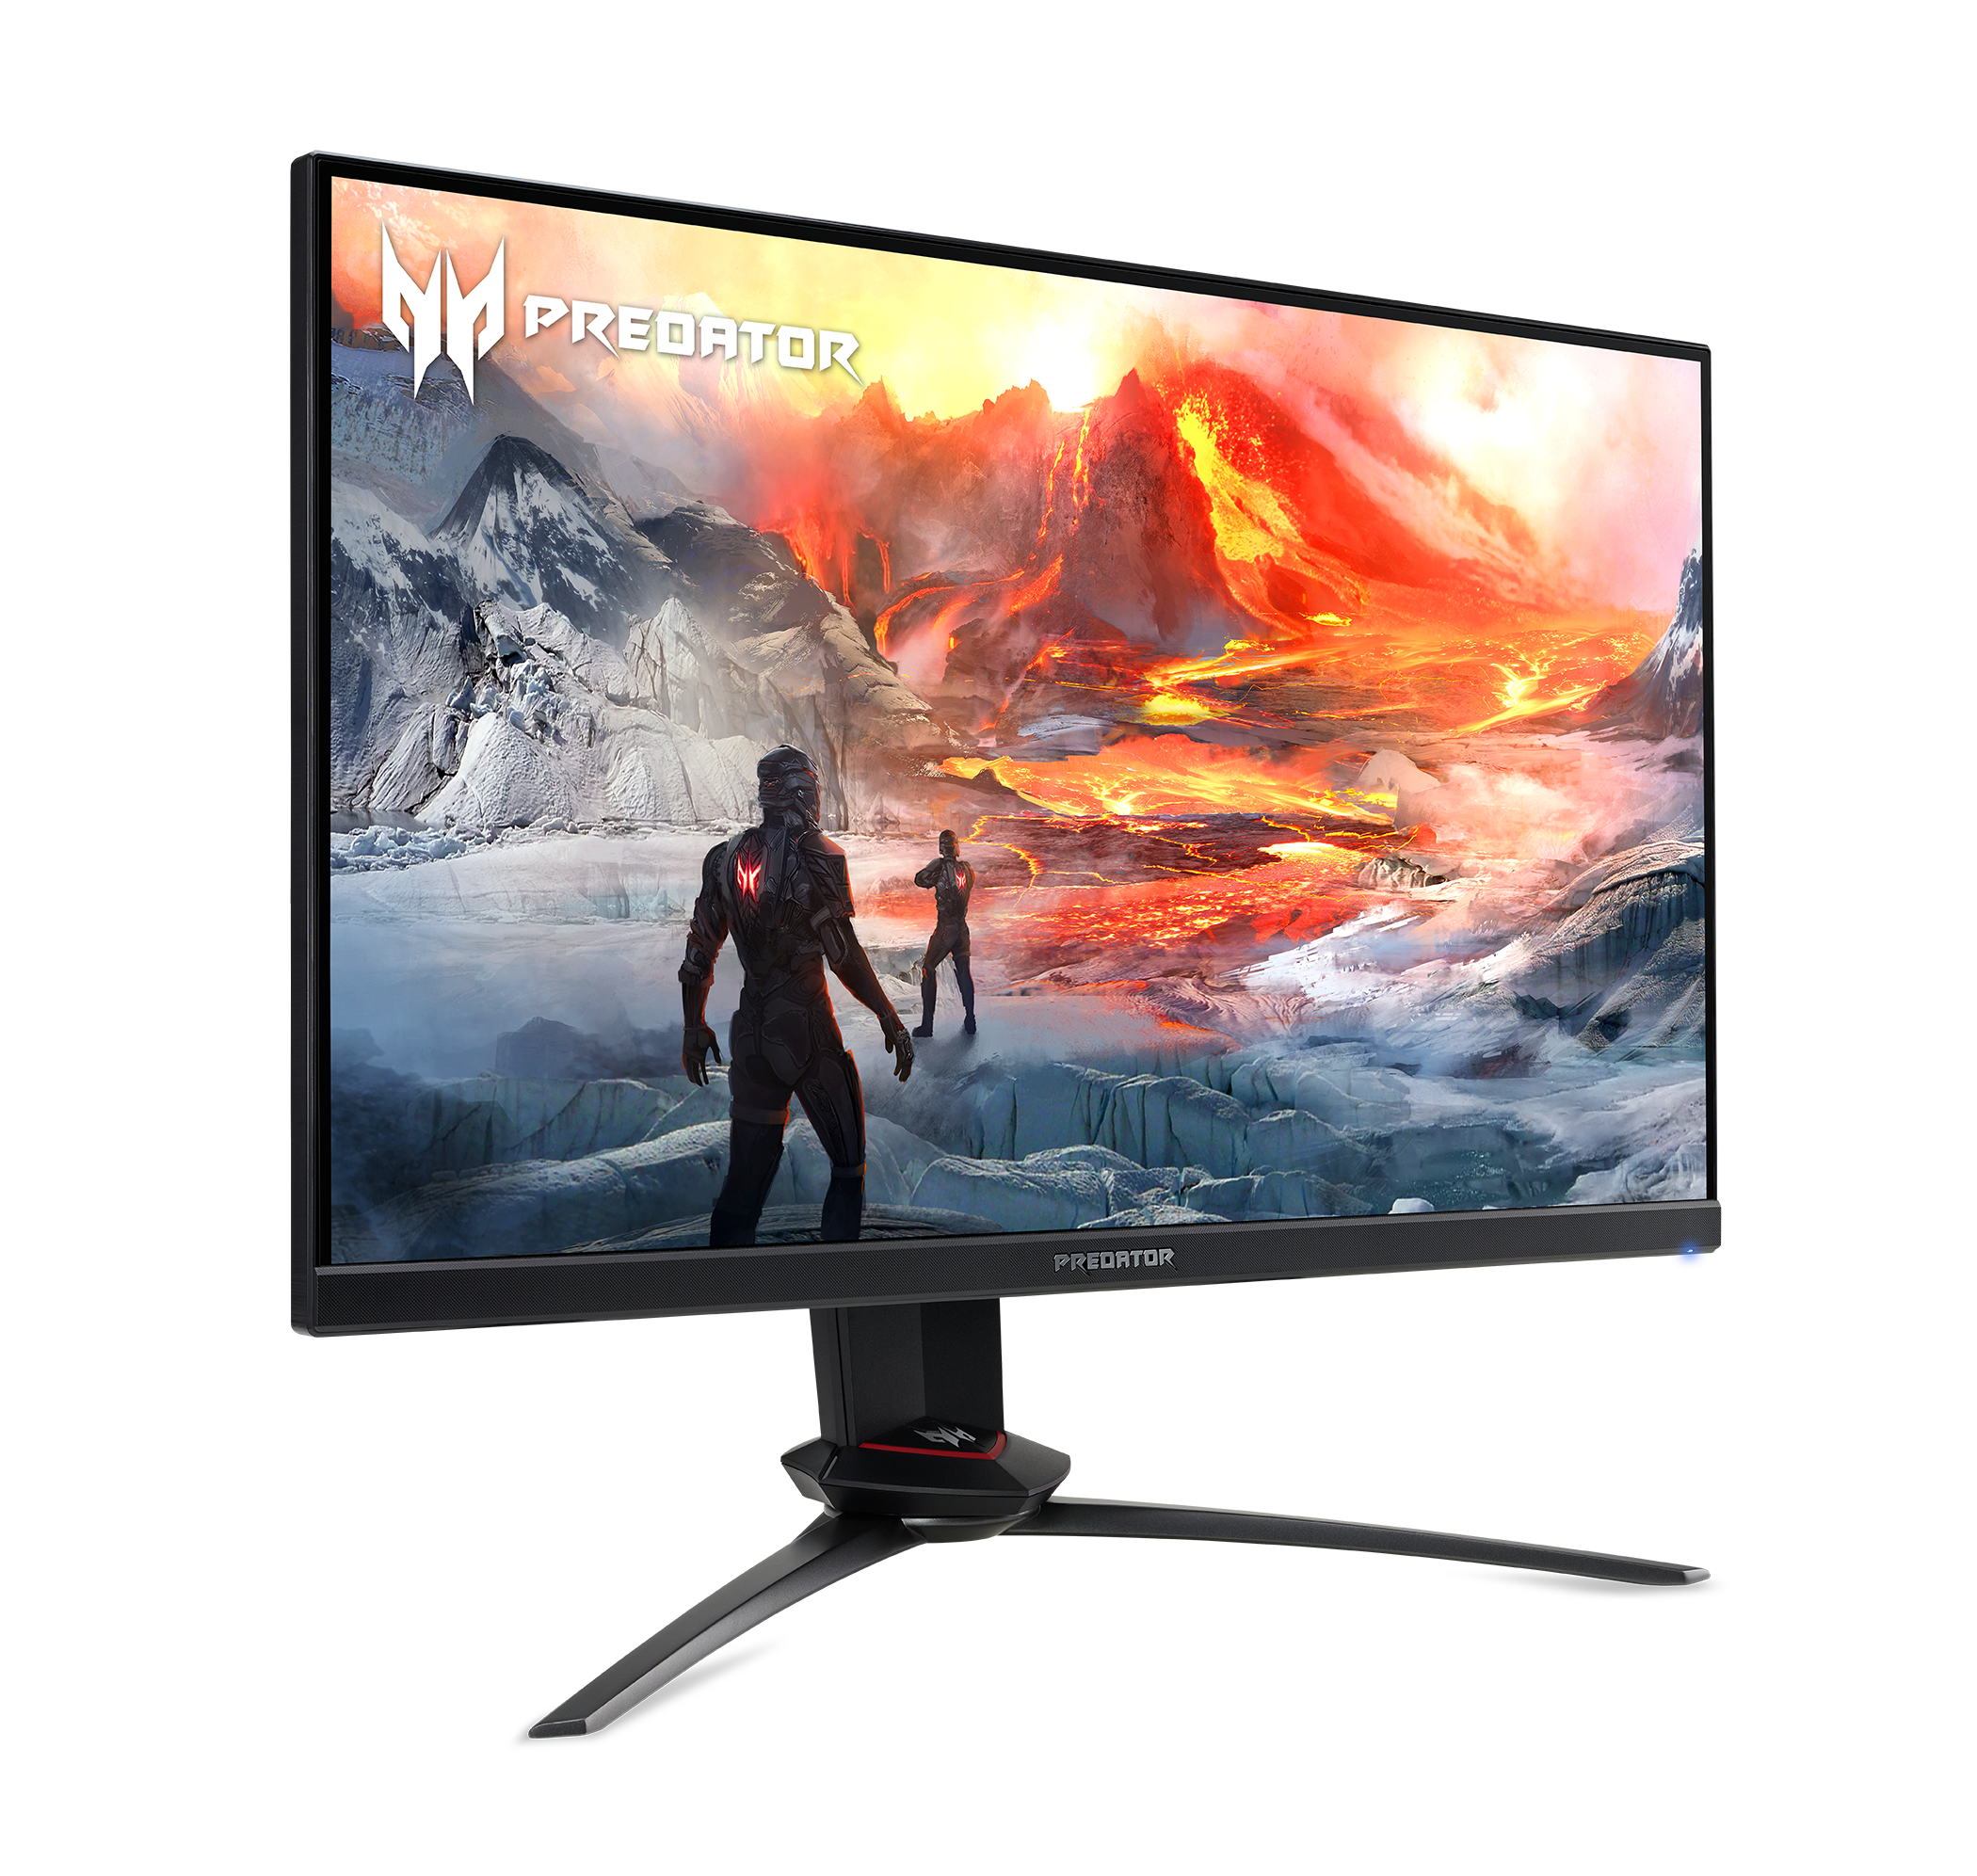 Acer Predator XB273 GZbmiiprx 27" FHD (1920 x 1080) IPS Monitor with NVIDIA G-SYNC Compatible, HDR400, Up to 0.5ms (G to G), Overclock to 280Hz  (1 x Display Port & 2 x HDMI Ports) - image 1 of 9